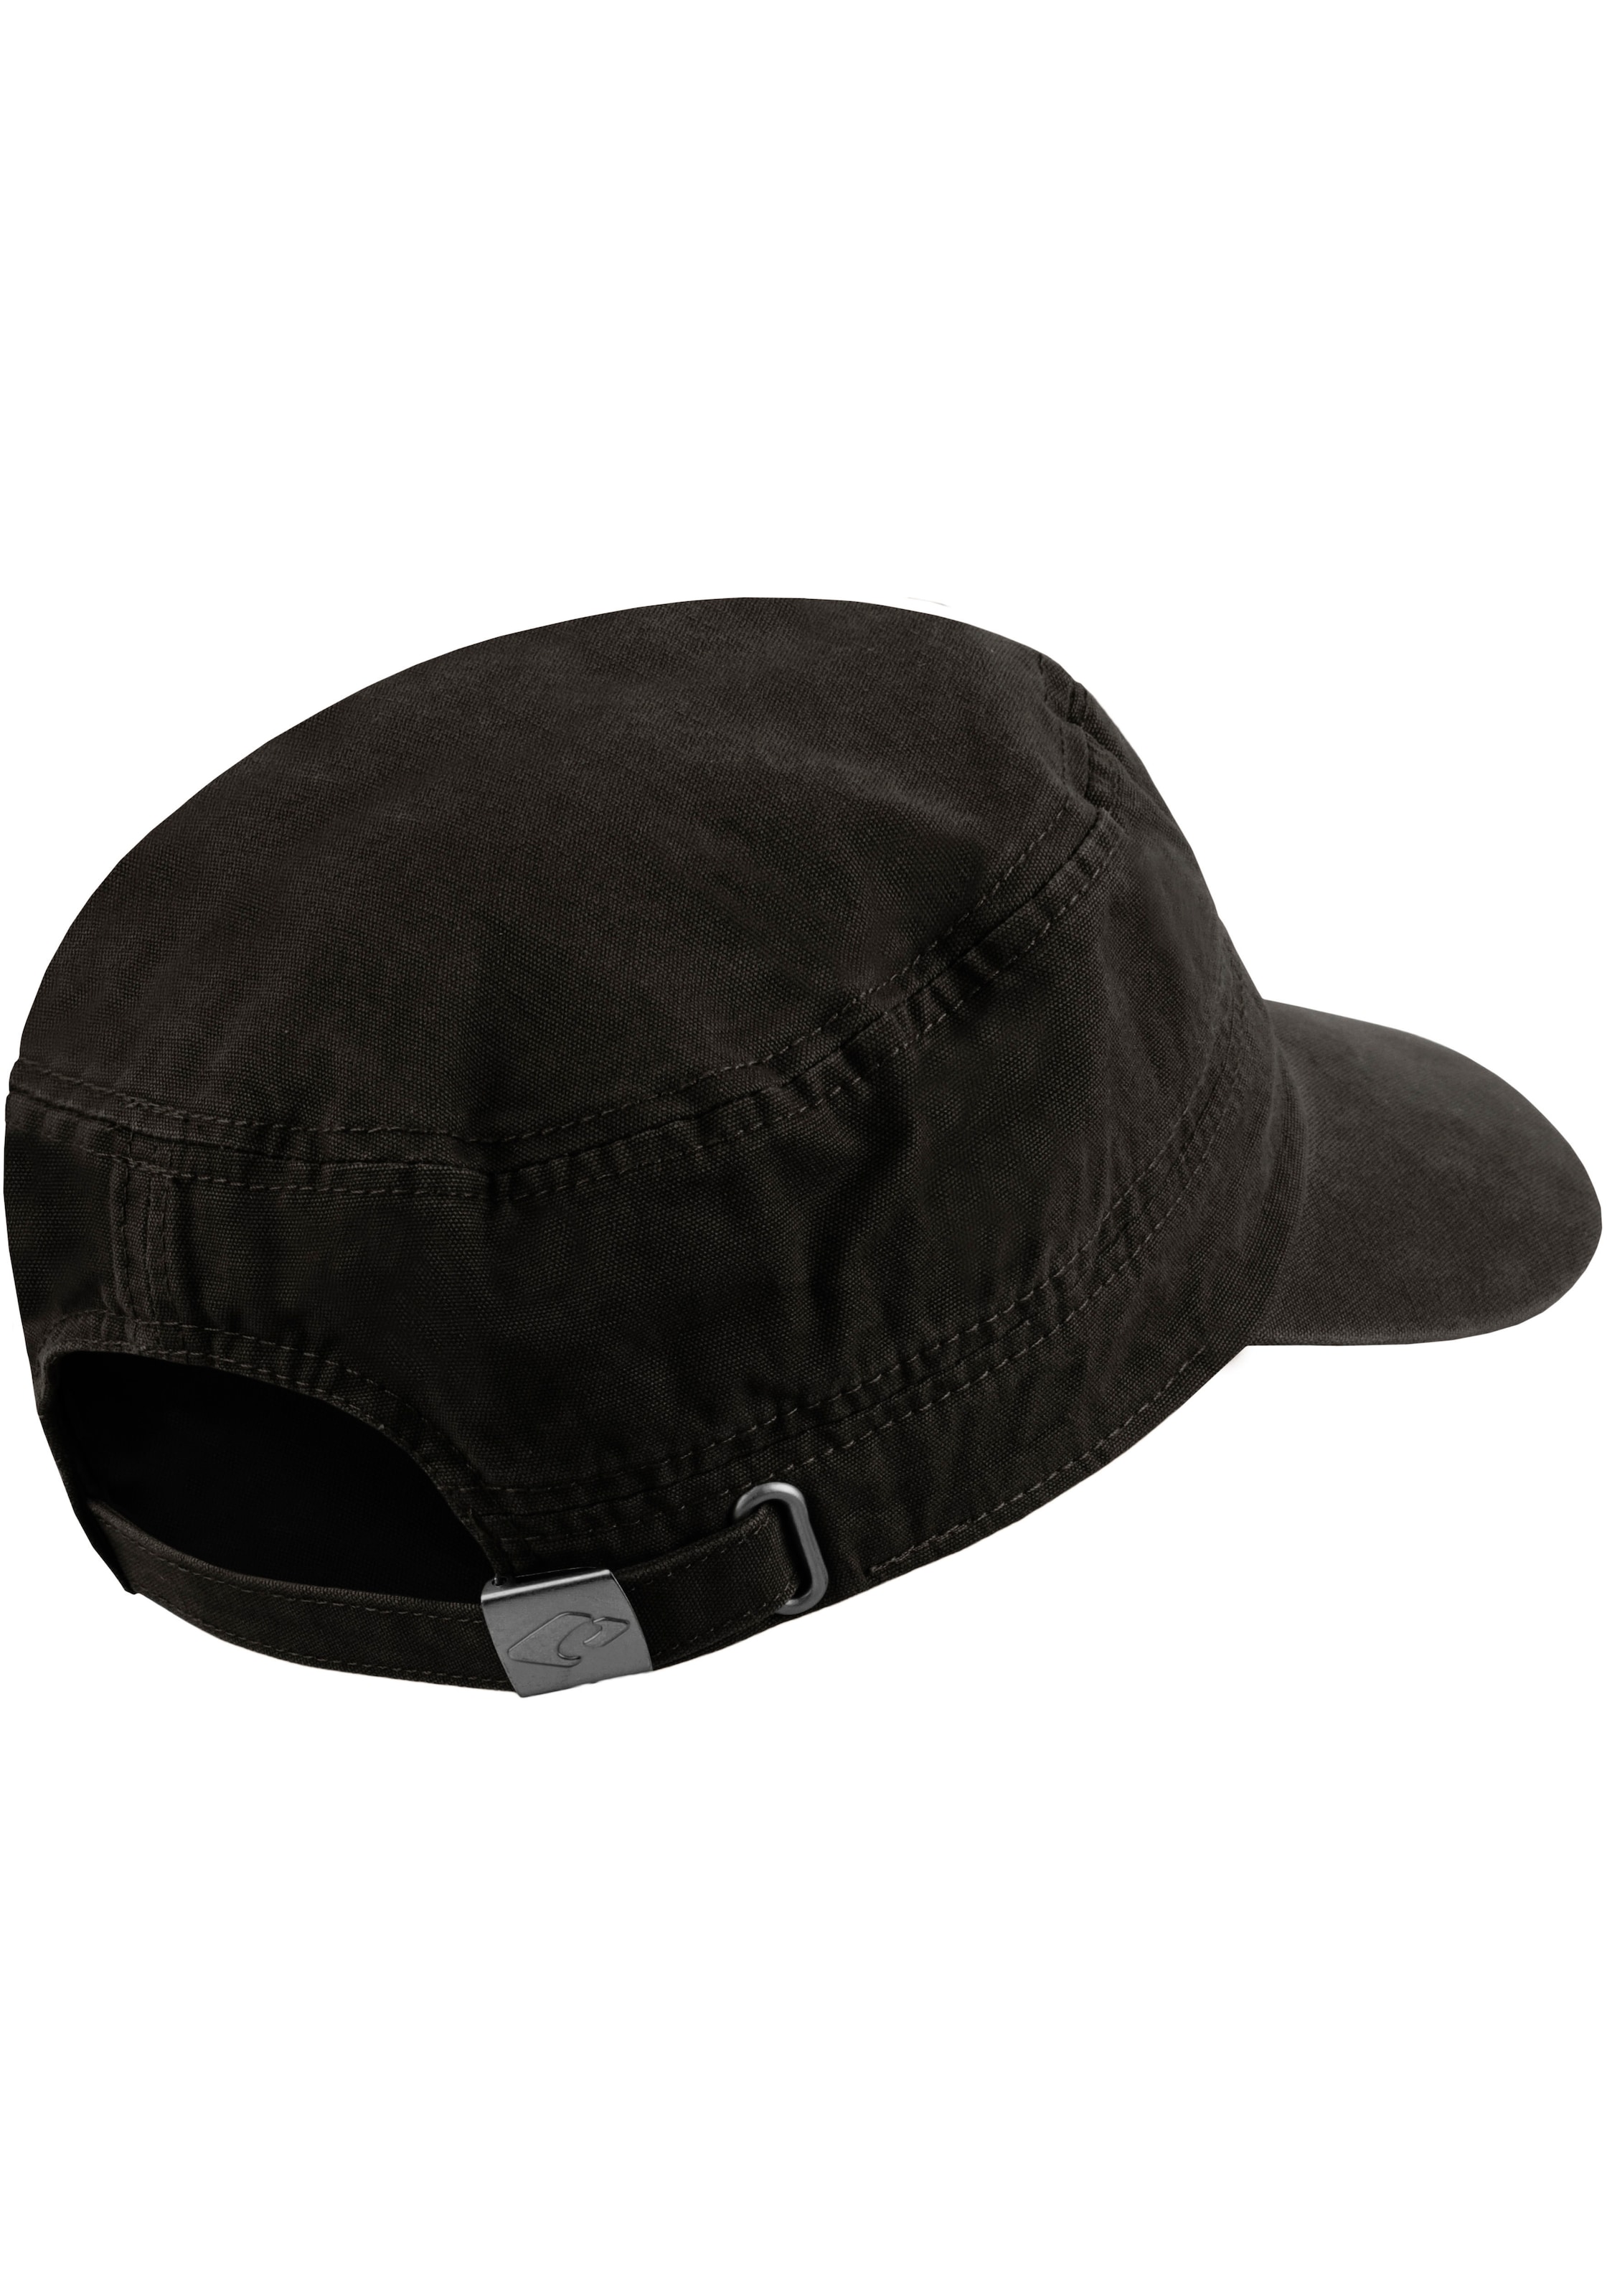 chillouts Army Cap »Dublin Hat«, Cap im Mililtary-Style